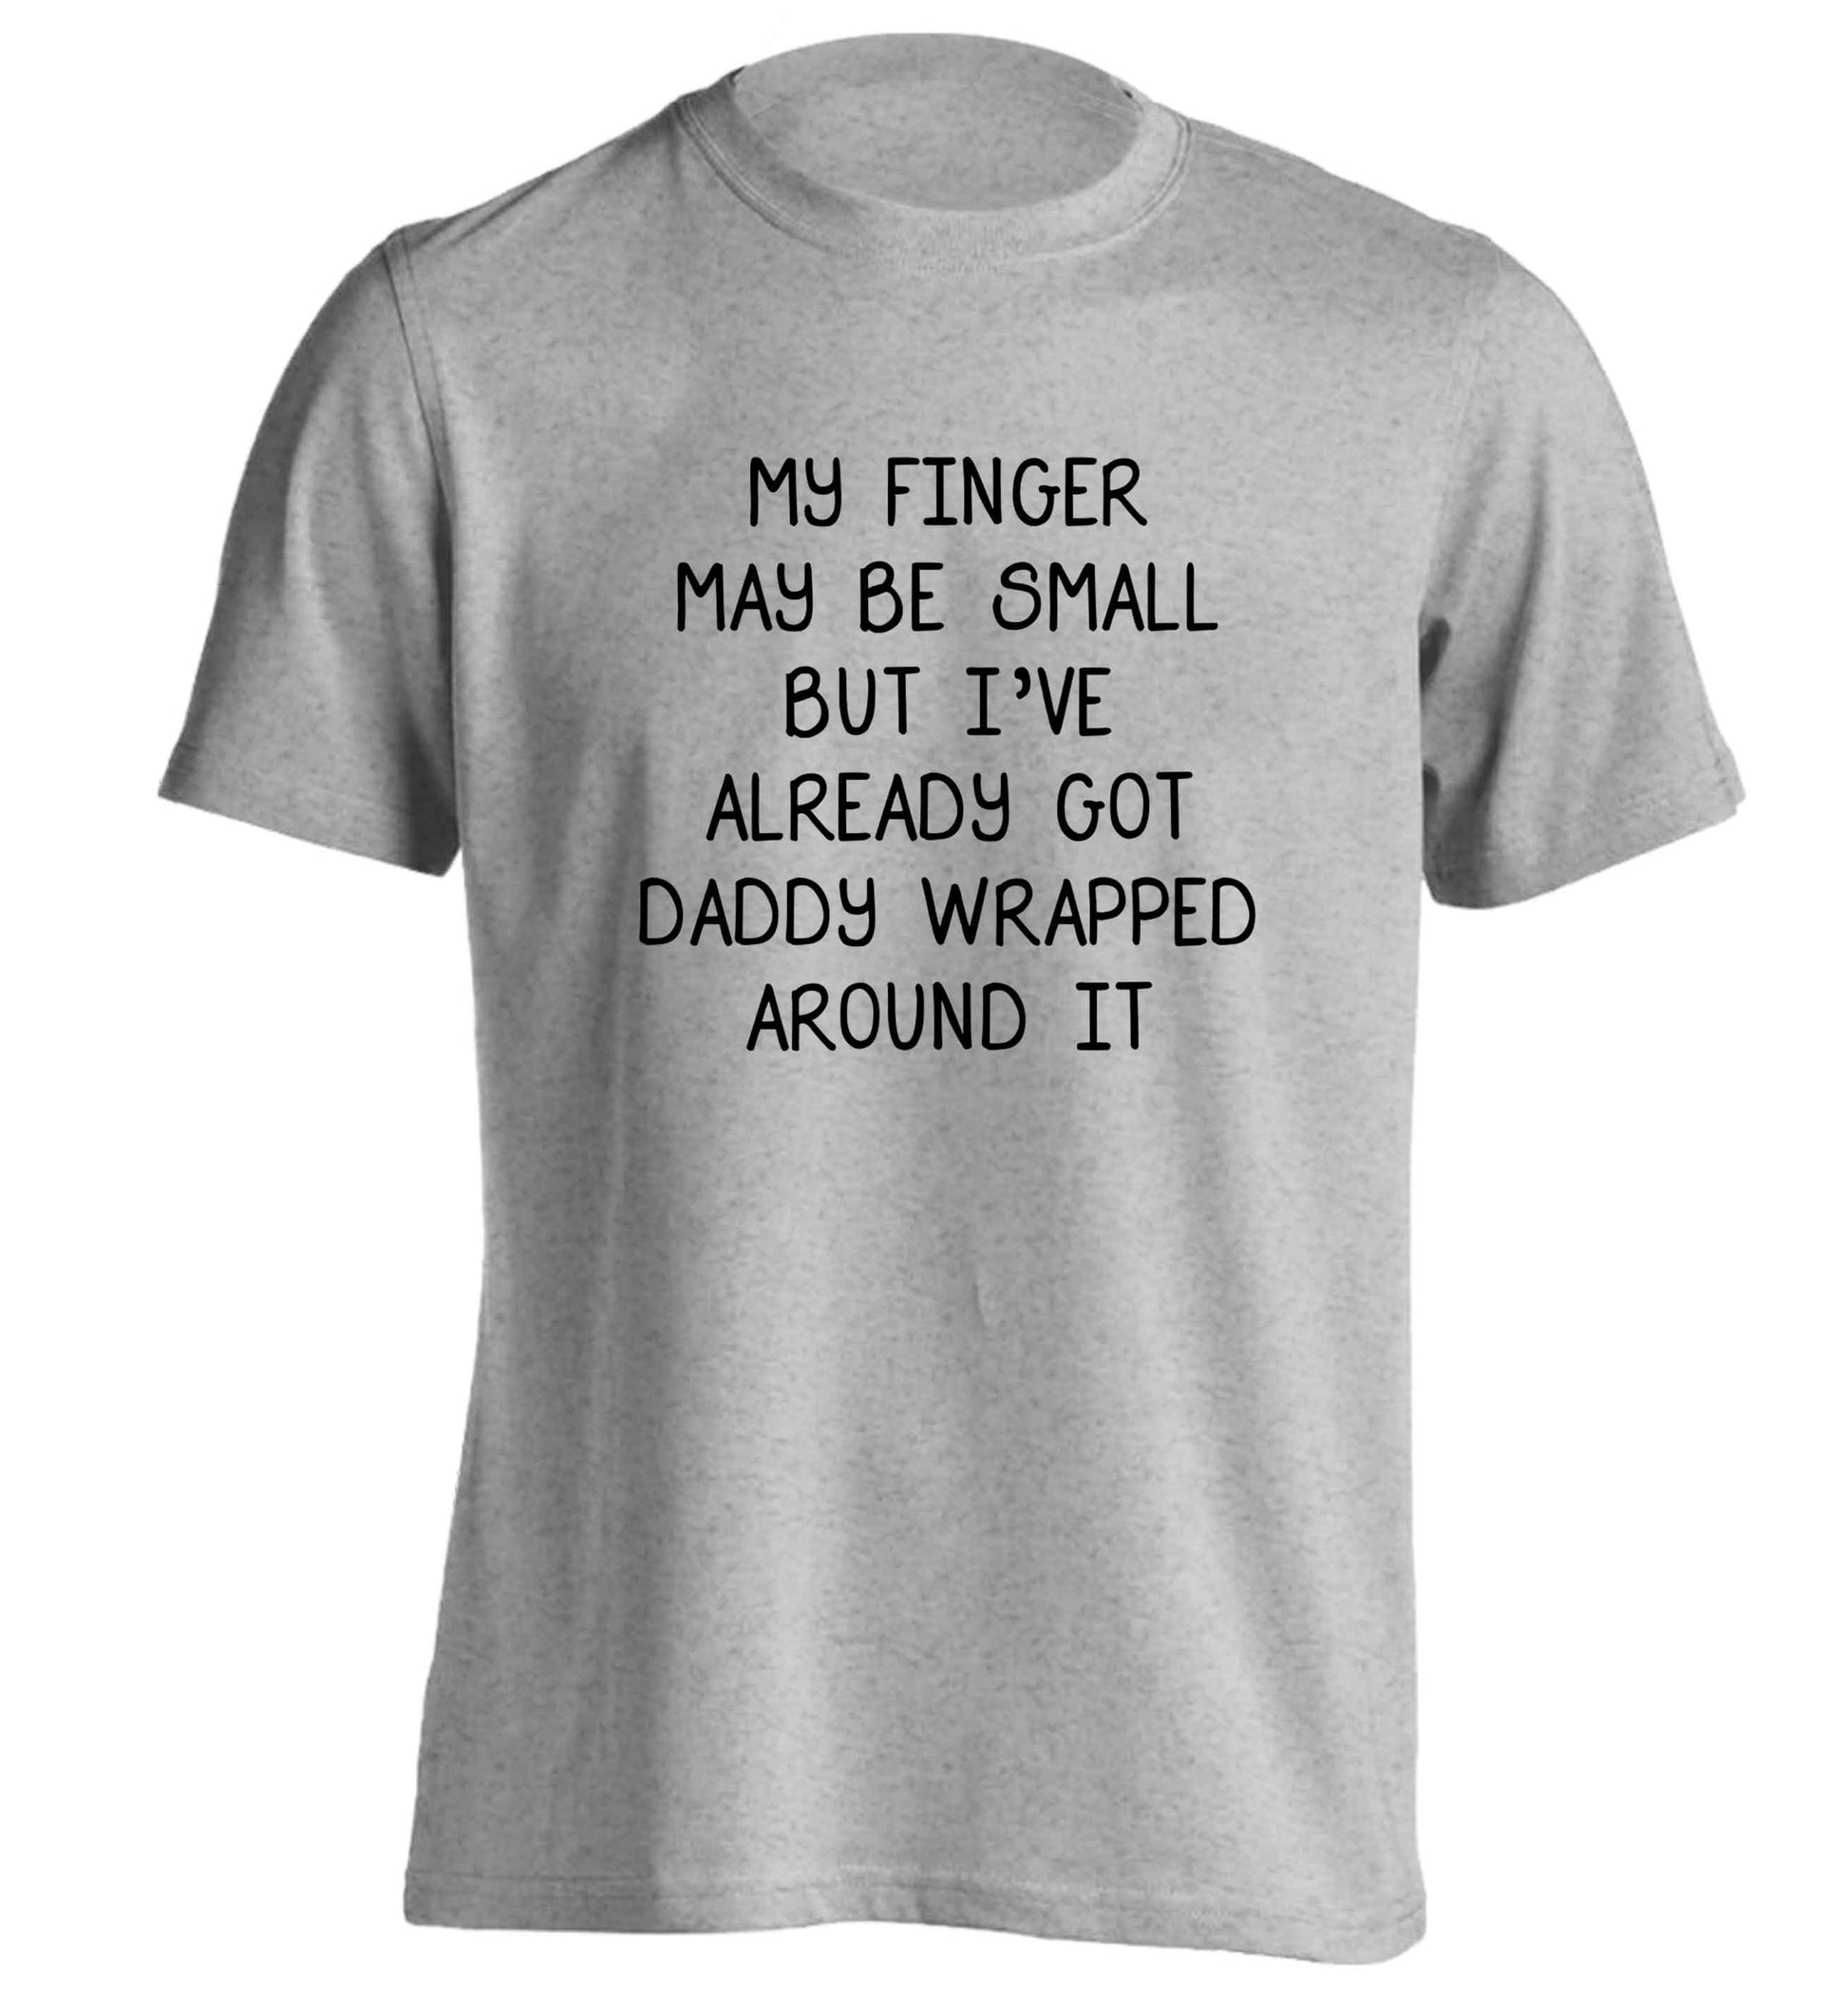 My finger may be small but I've already got daddy wrapped around it adults unisex grey Tshirt 2XL